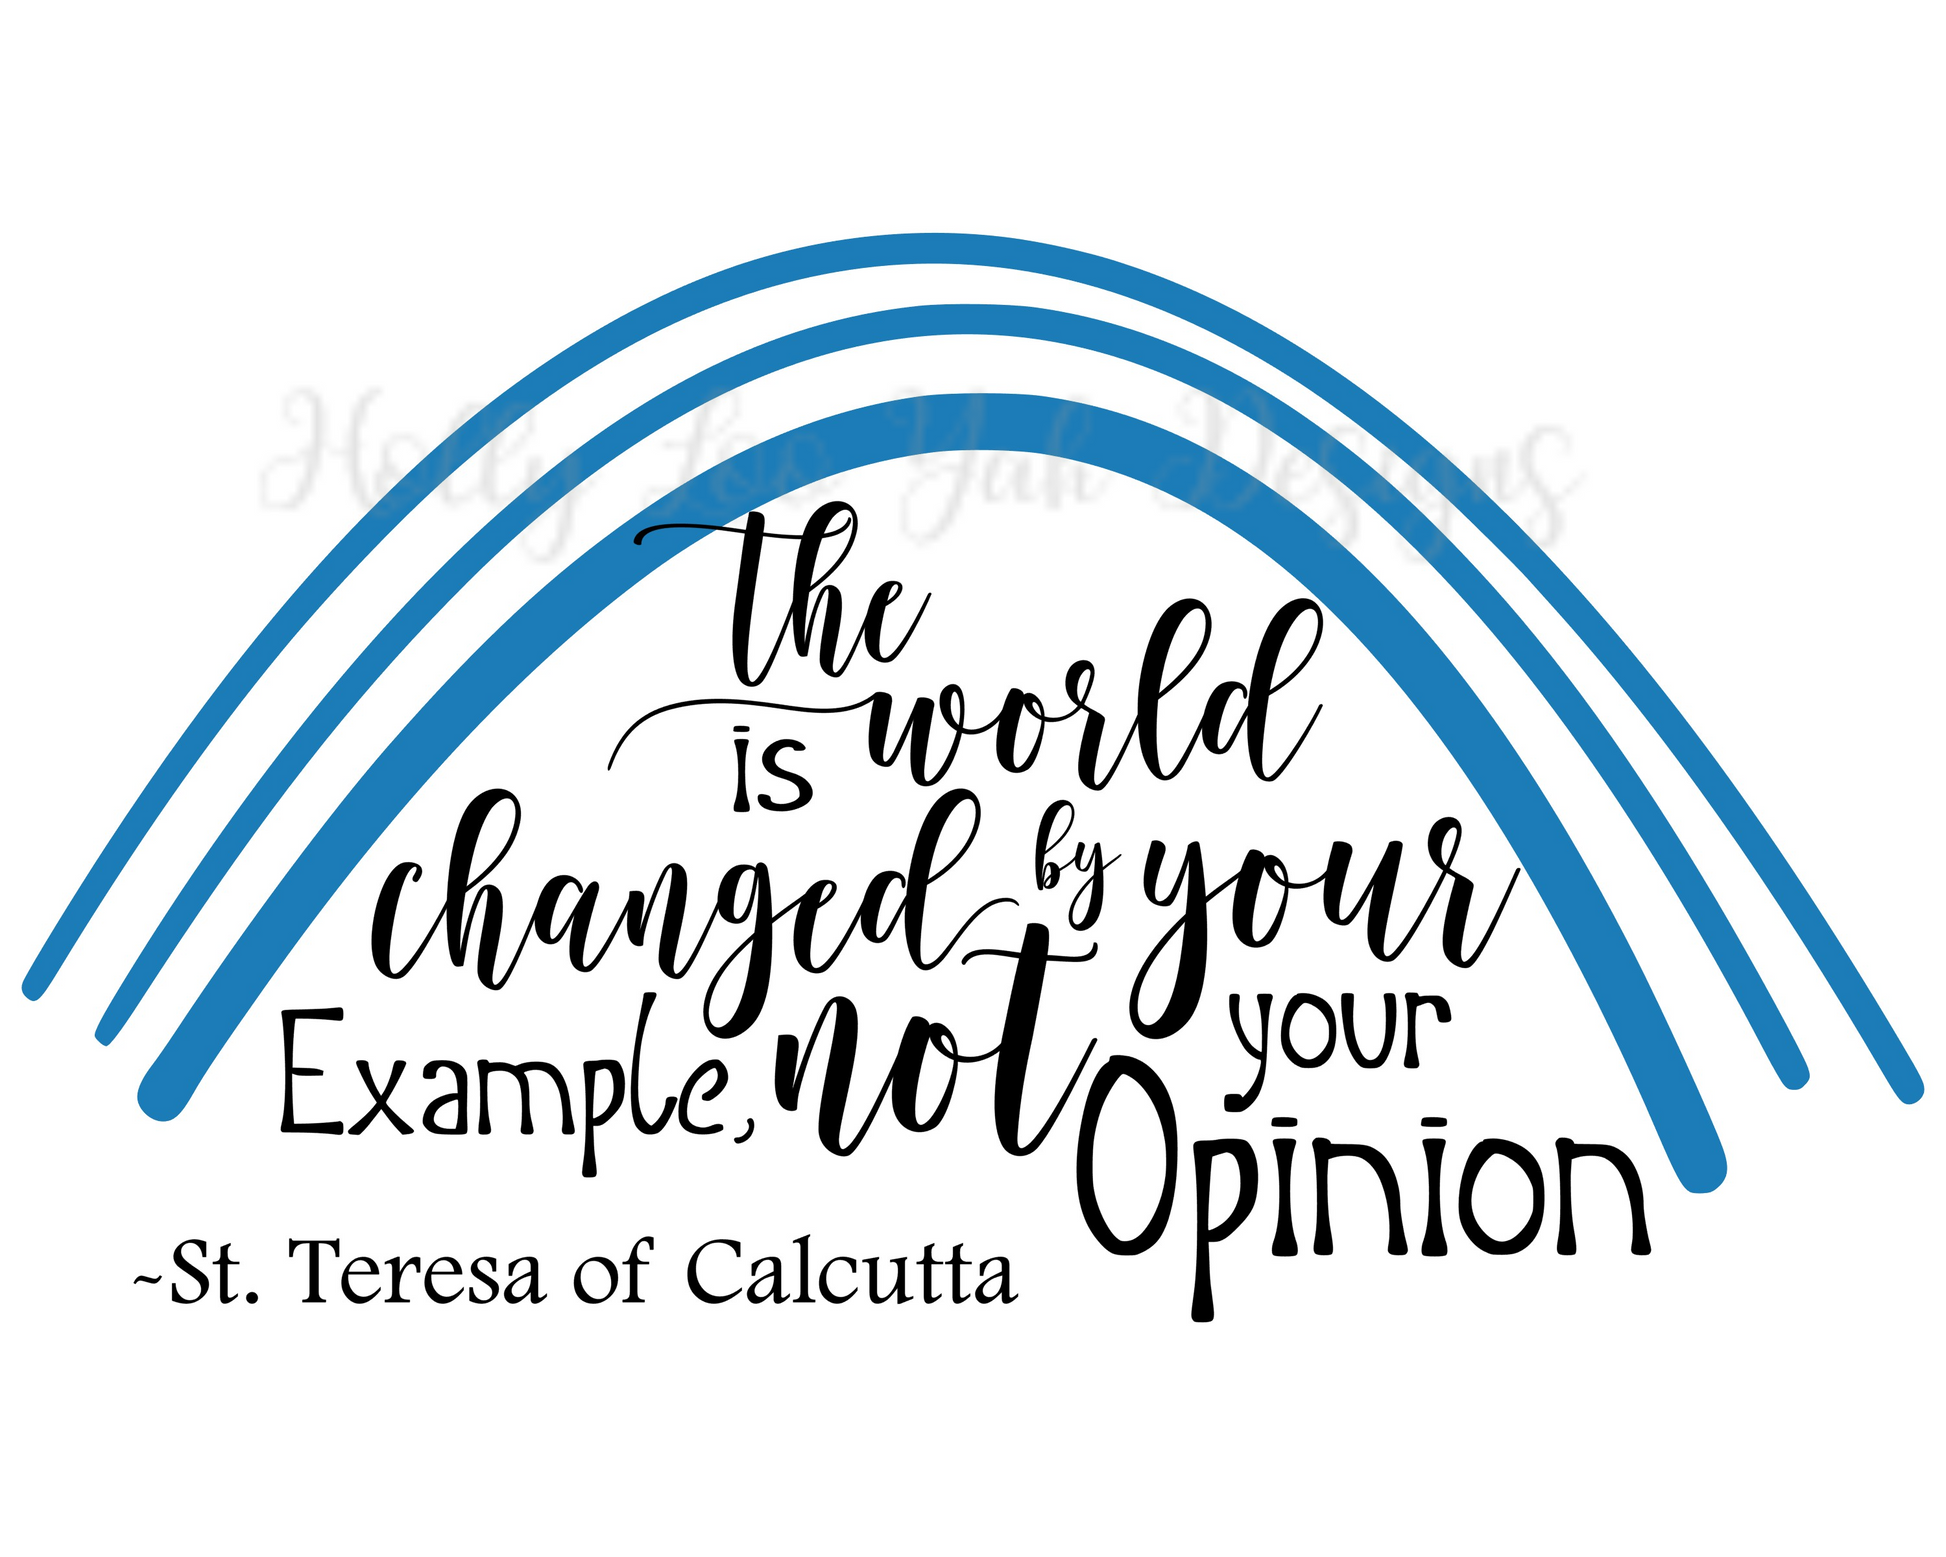 St. Teresa of Calcutta Quote : The world is changed by your example not your opinion